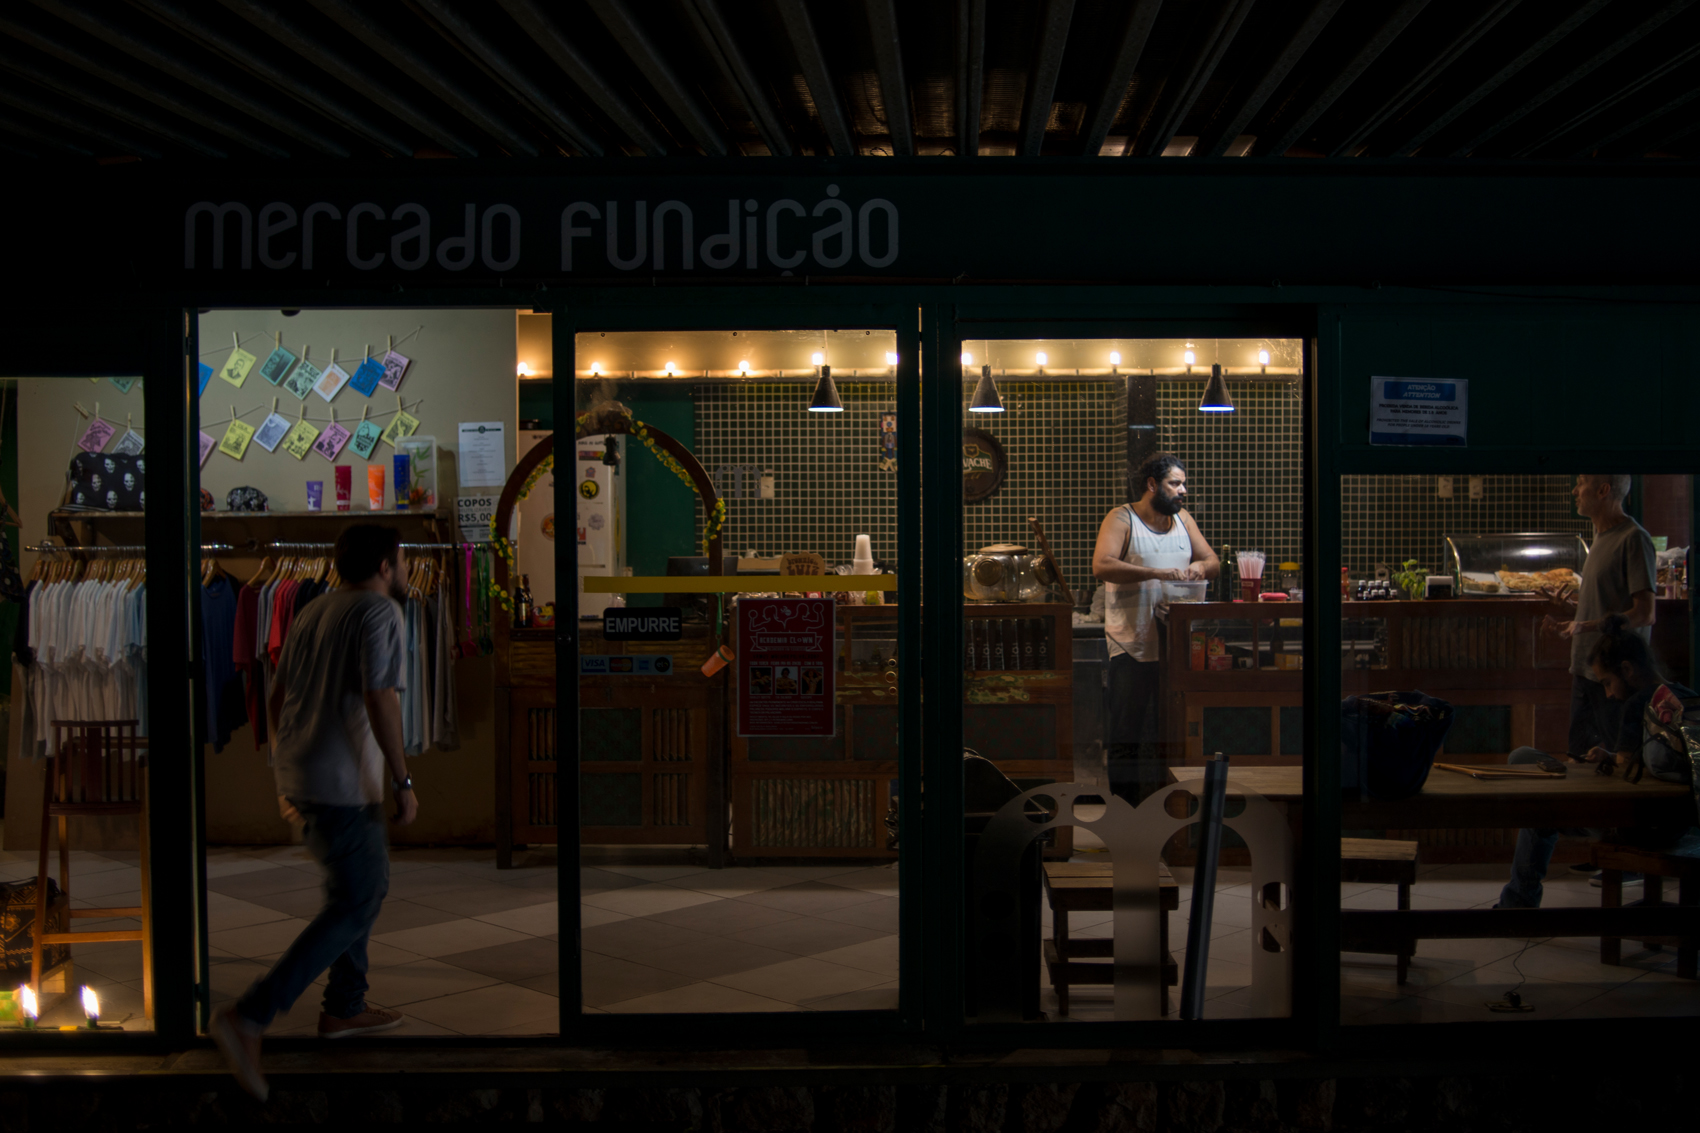  Mercado Fundição is a general store that serves some food at Lapa, the bohemian neighborhood of Rio. It's there where Ed introduces vegetarian cuisine on the menu every Monday, as part of the Meatless Monday global campaign. 